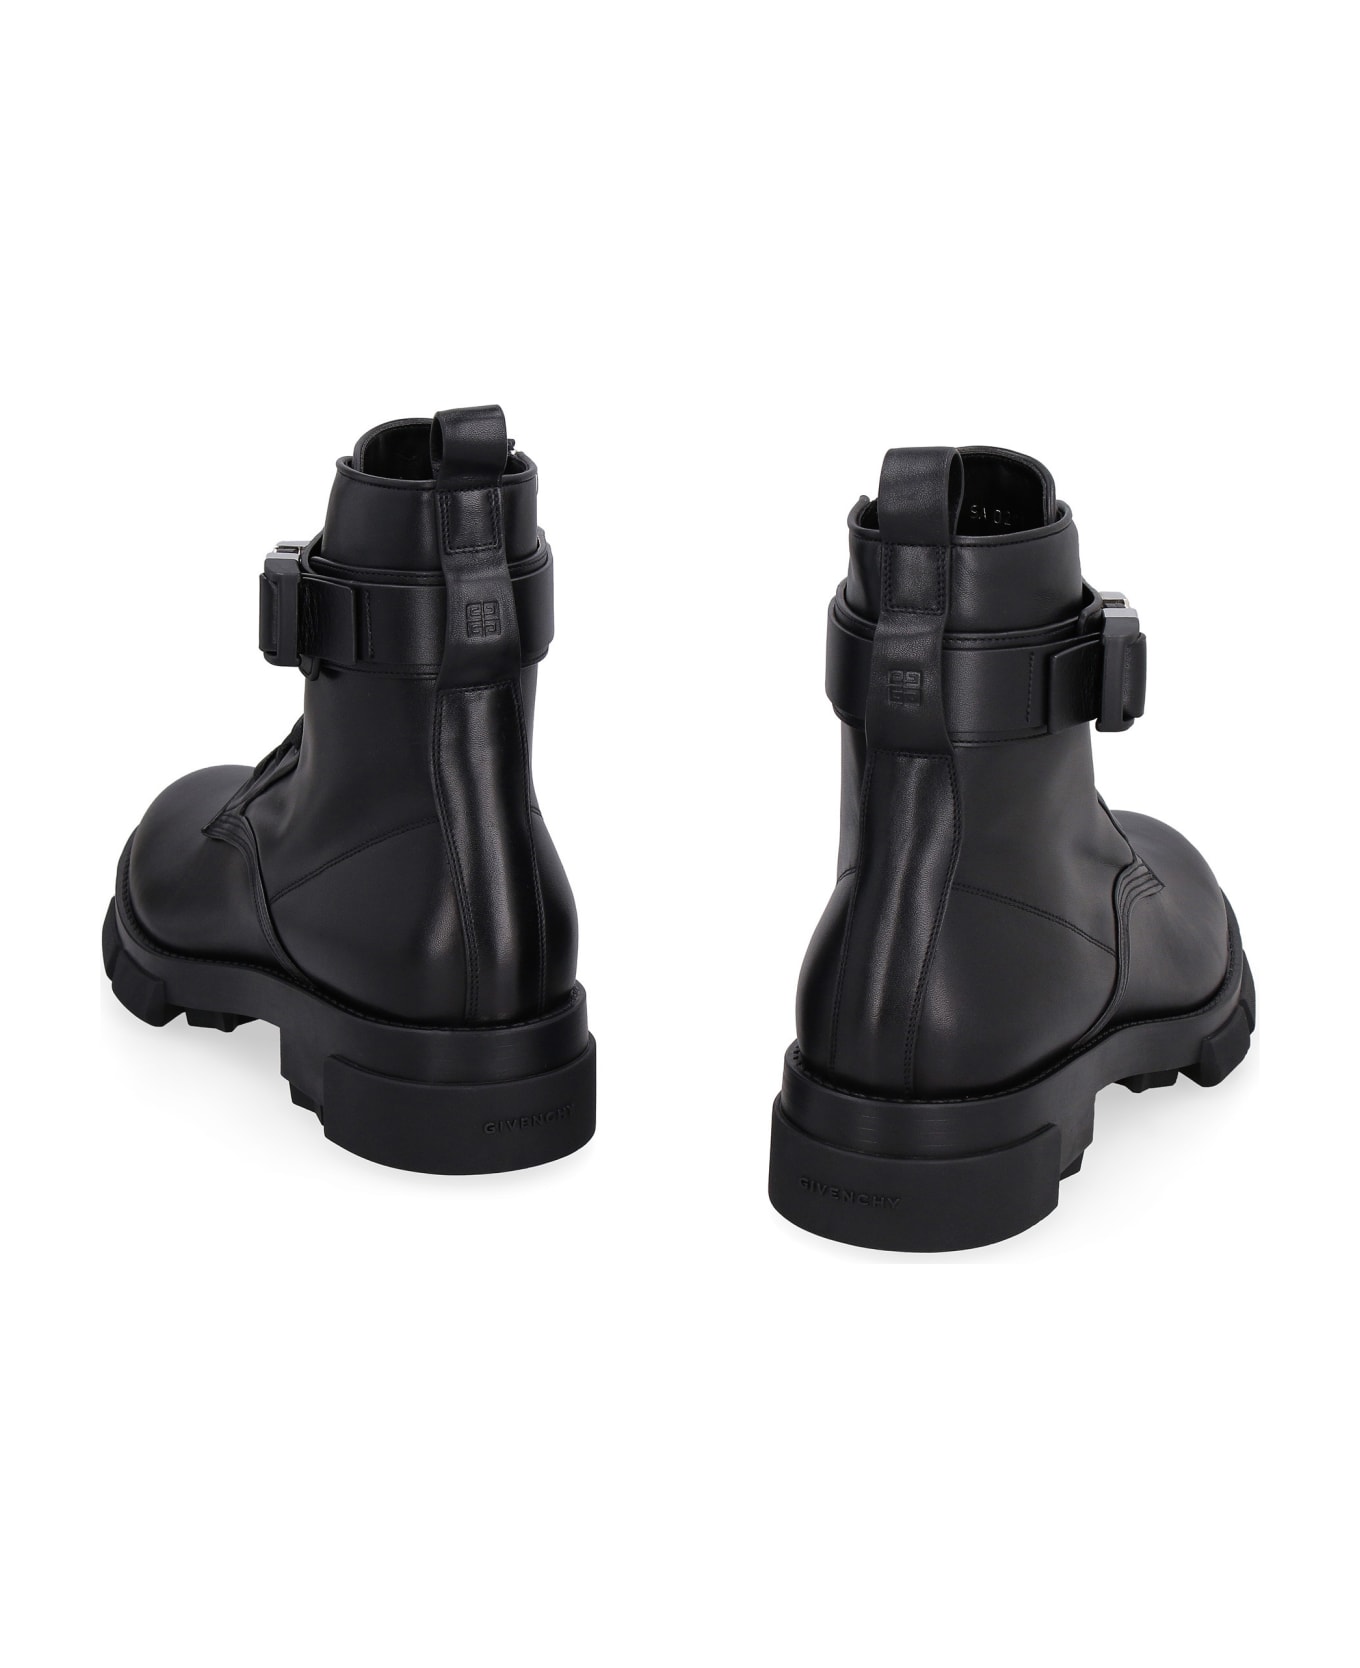 Givenchy Terra Leather Ankle Boots - Black